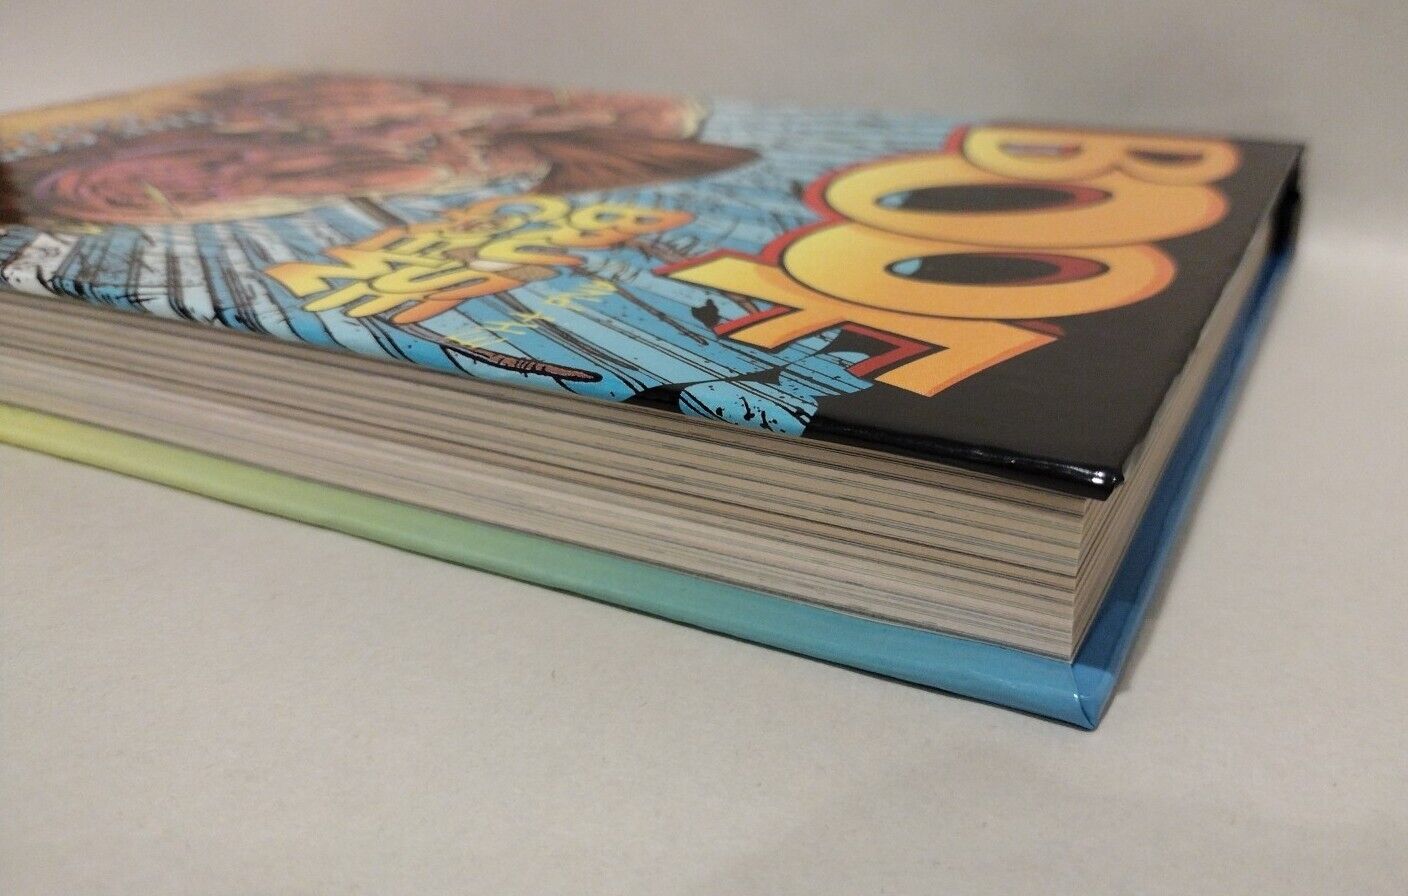 Boof & The Bruise Crew 1994 Complete Collection Custom Bound Image Comic HC ARG